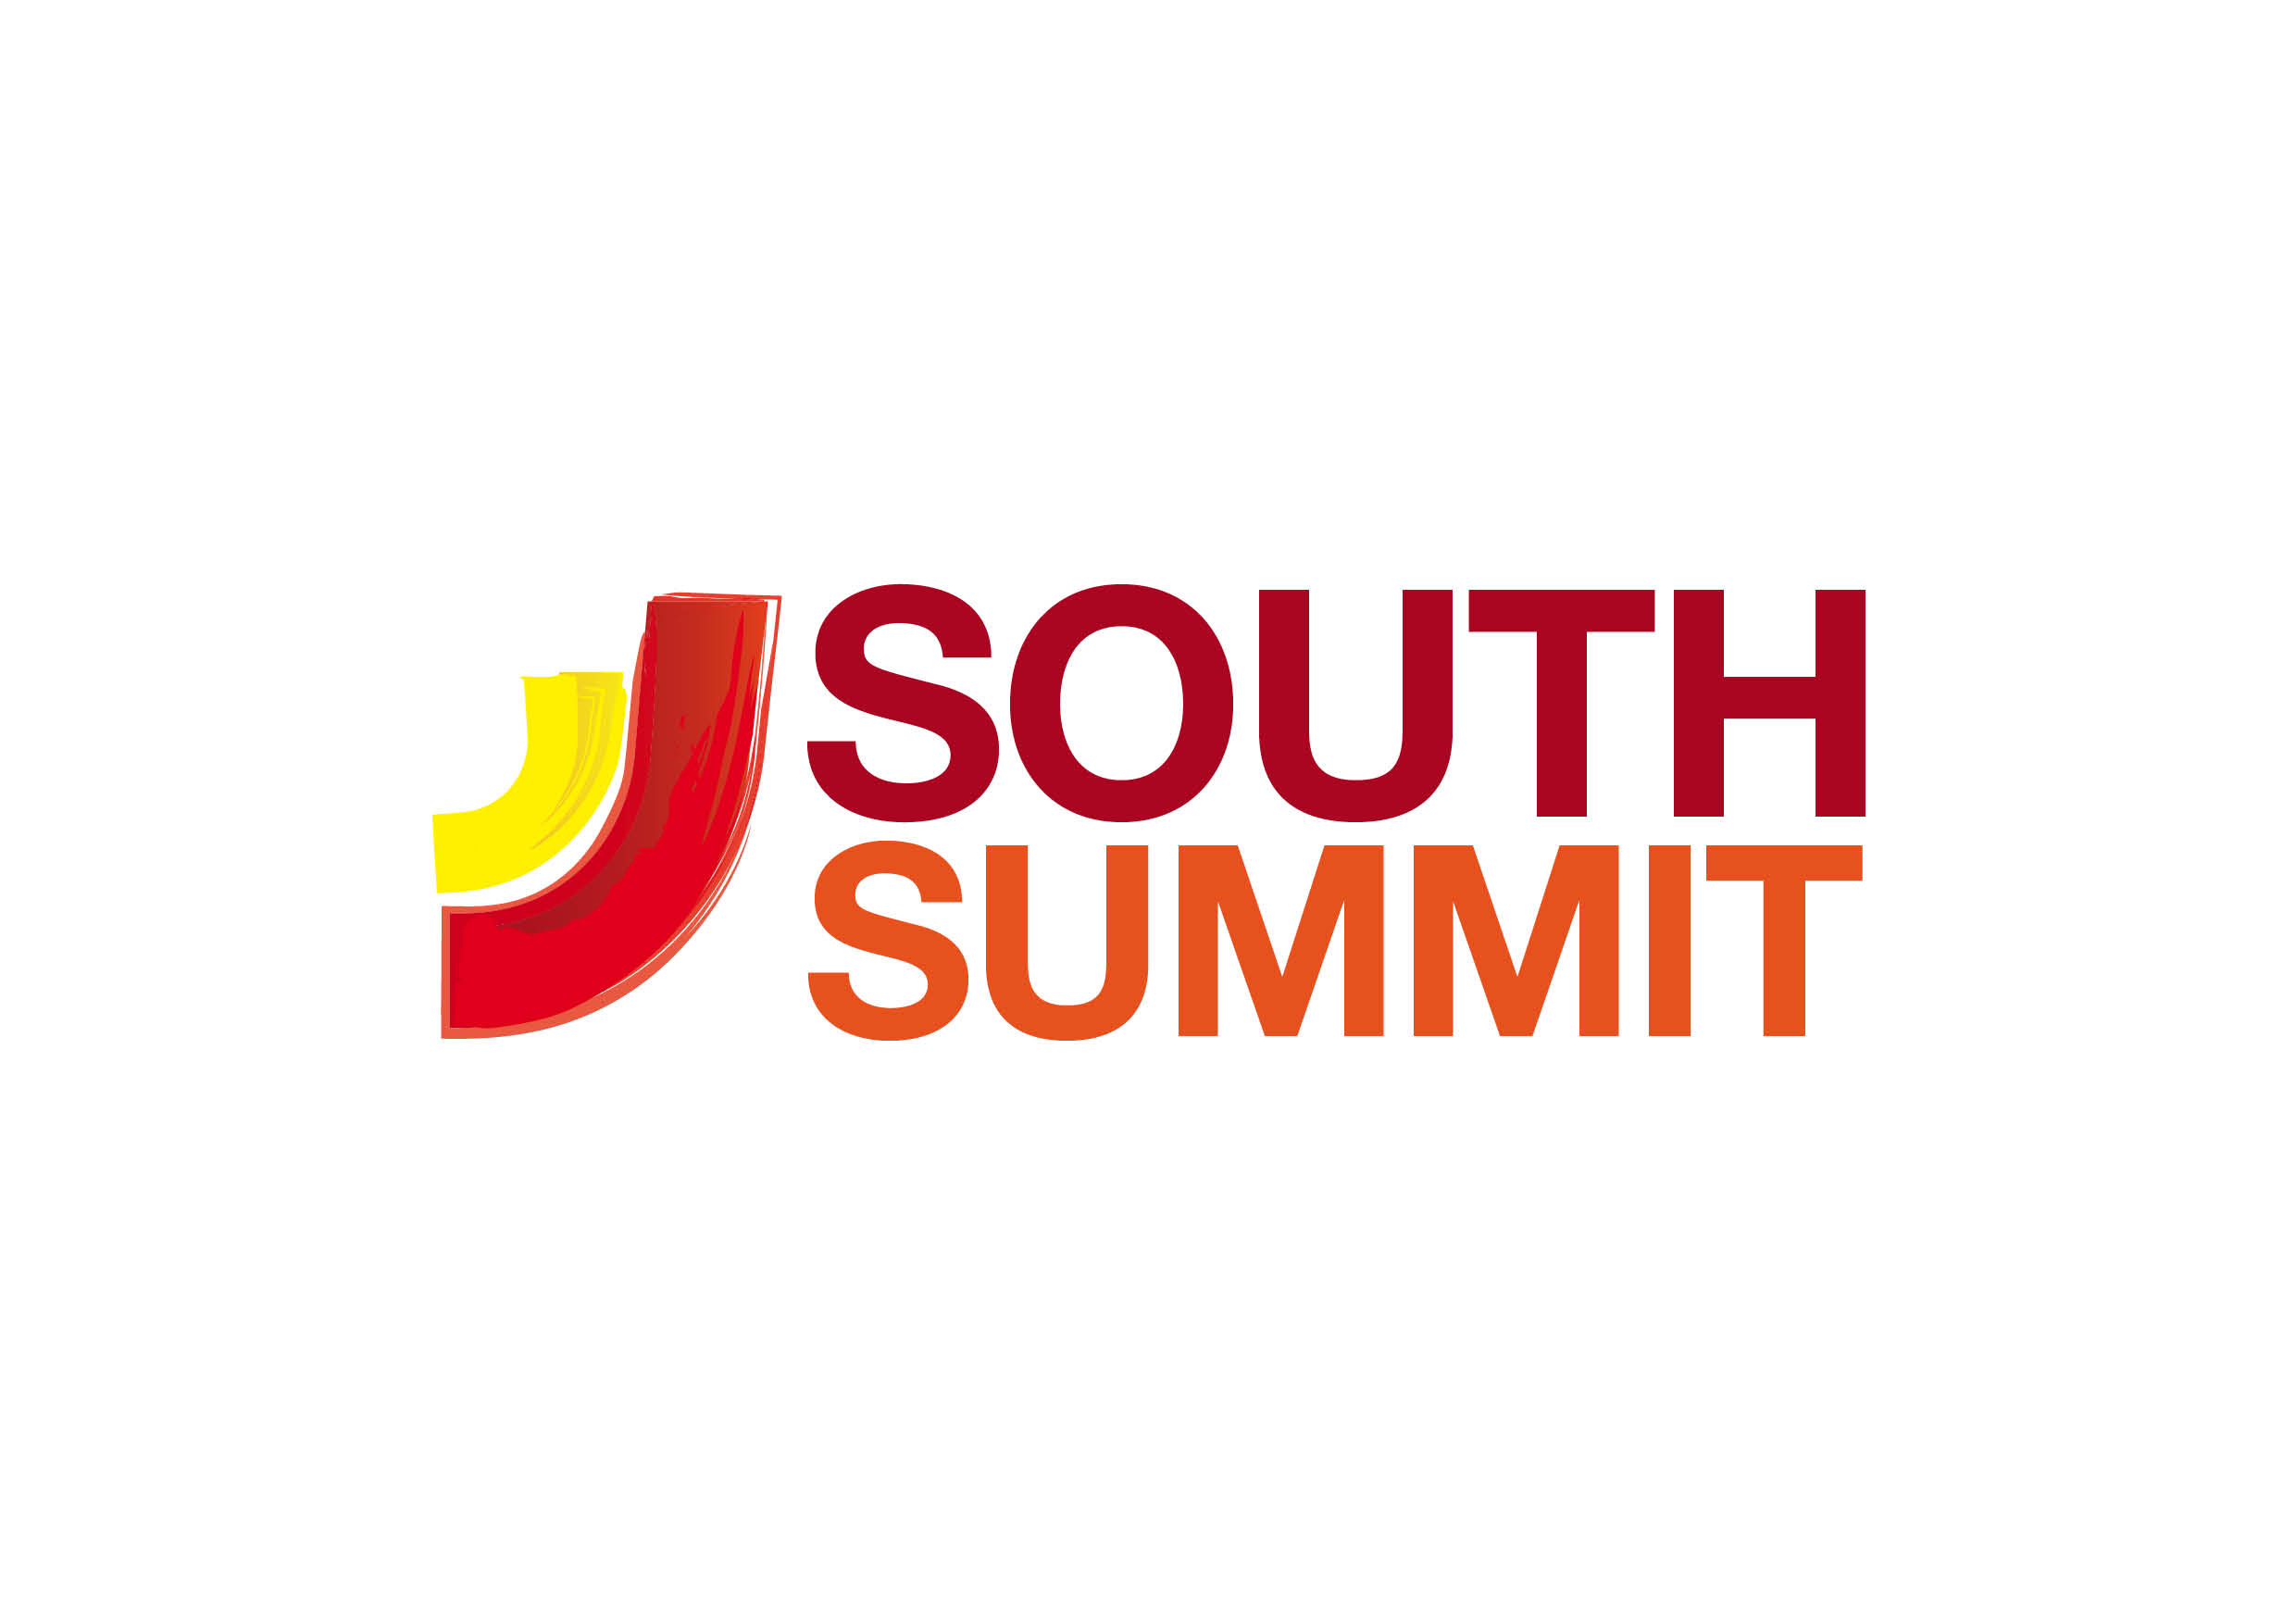 Spain Startup=South Summit